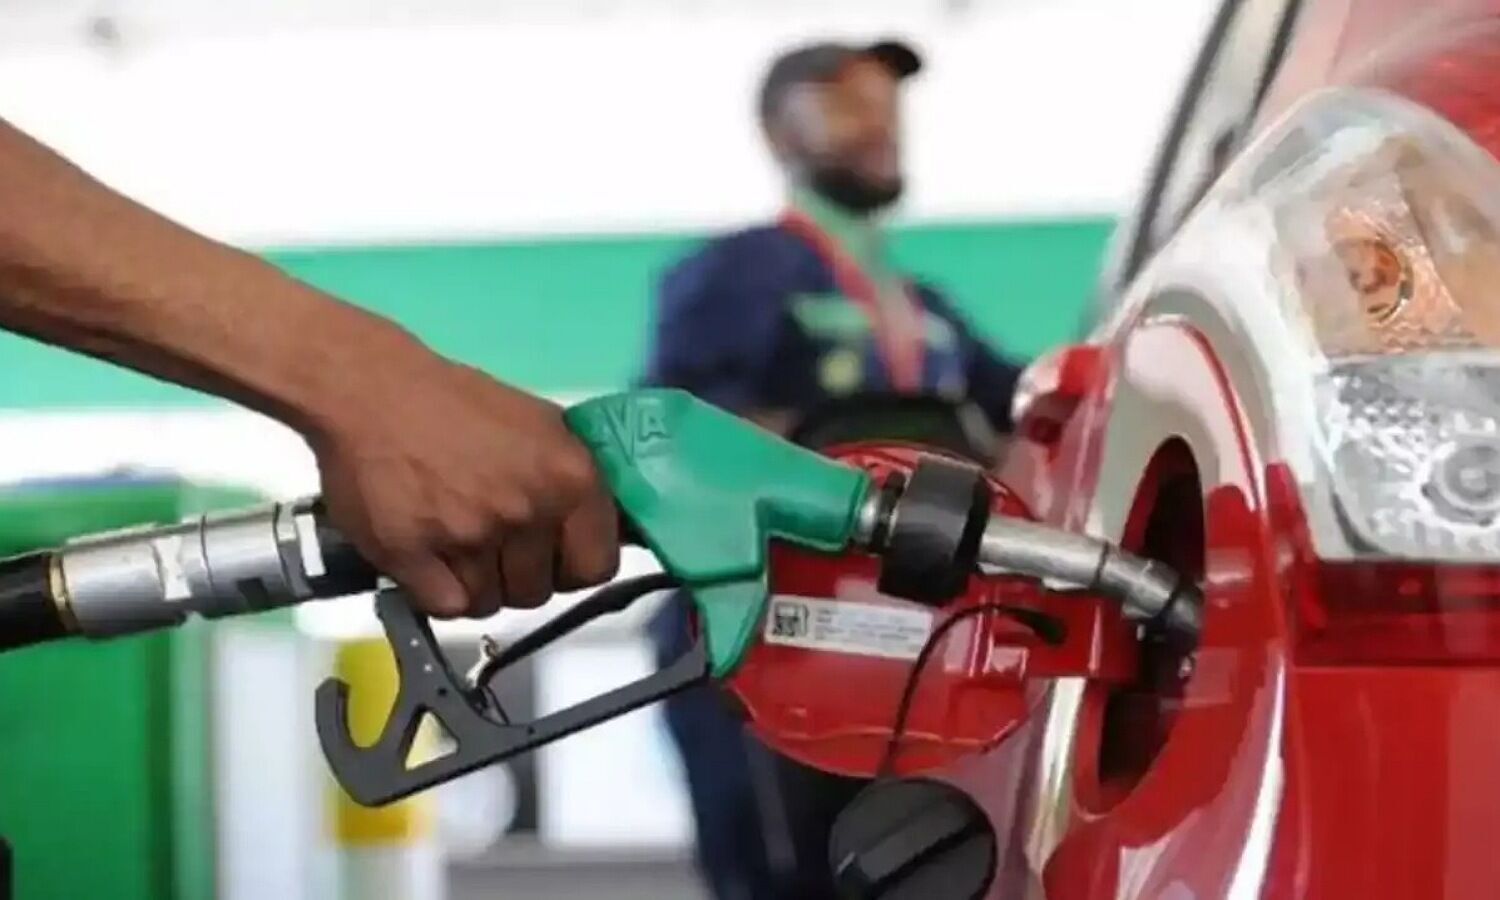 Petrol-Diesel Price Today: Oil companies have released the new rate of petrol-diesel, know today’s price